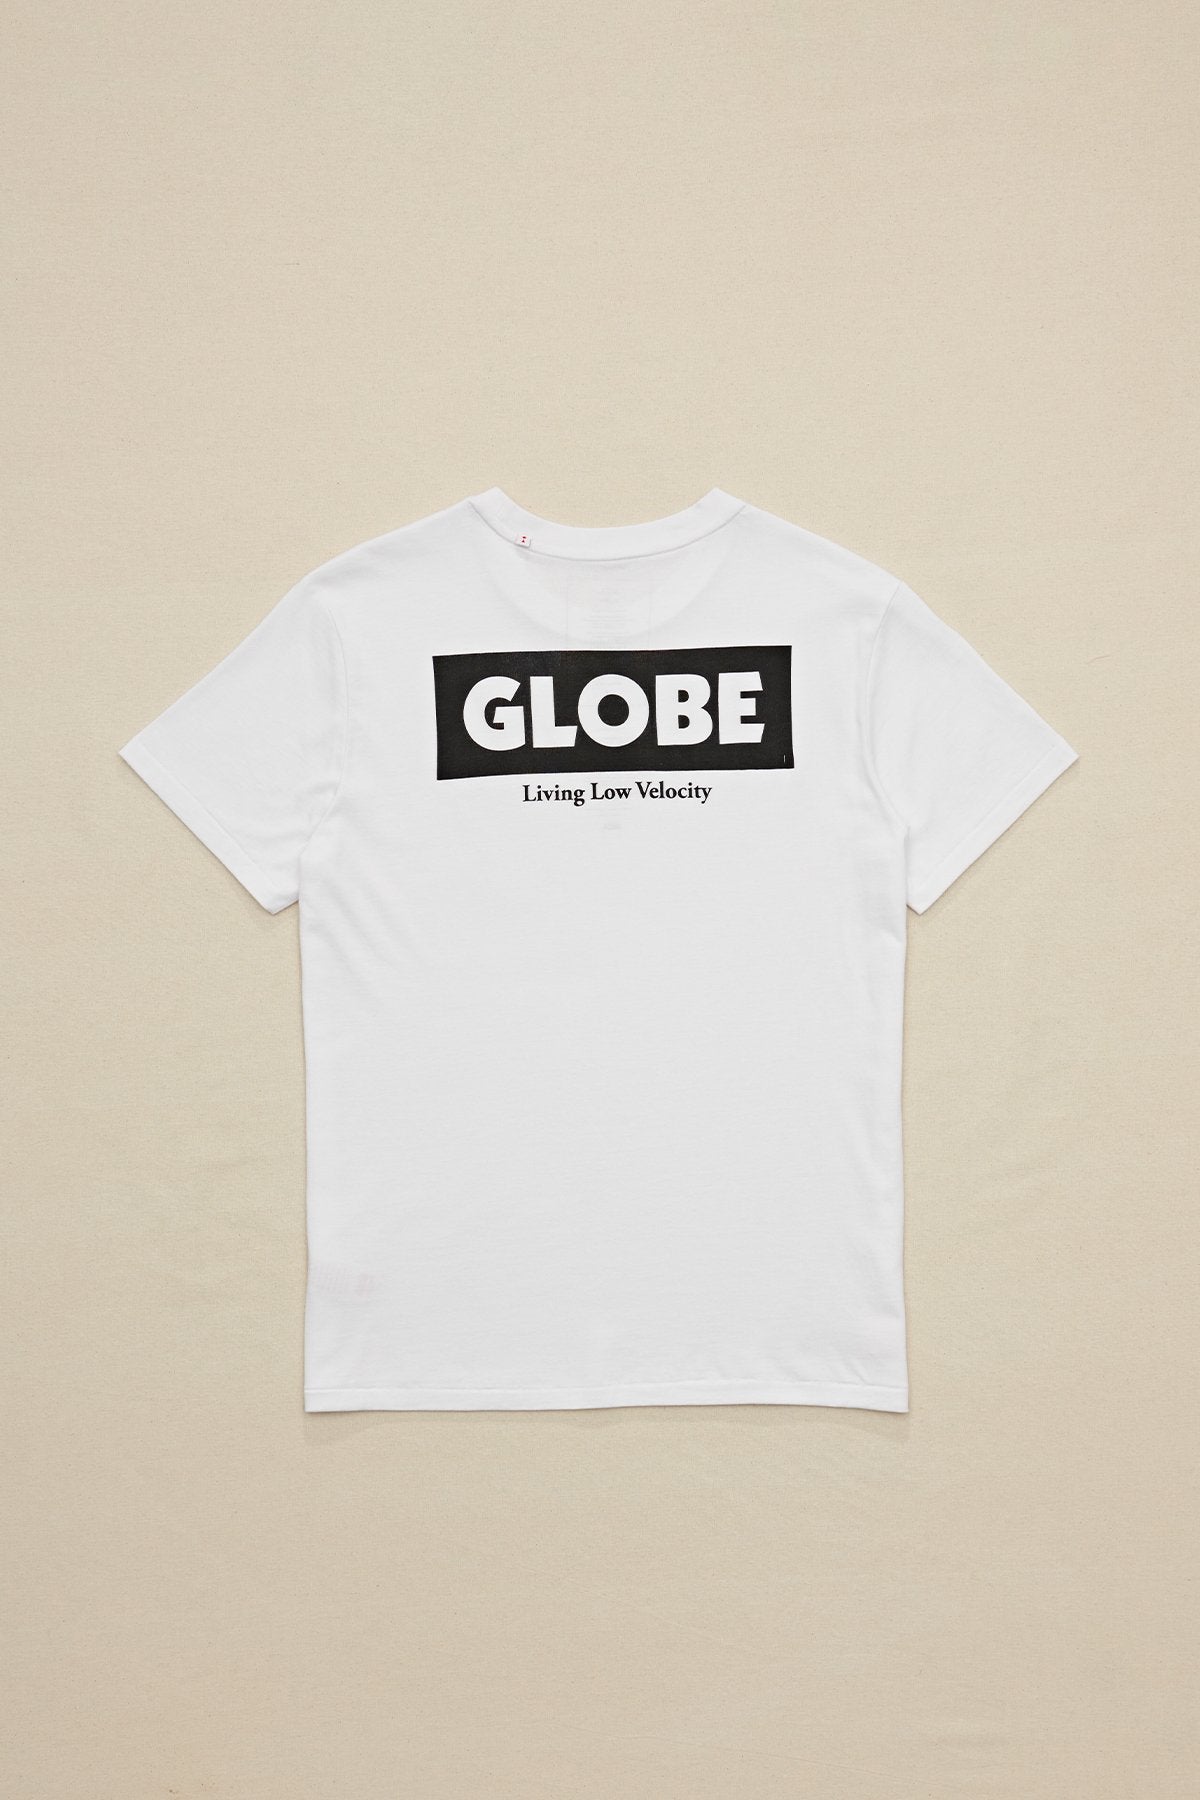 Globe T-shirts - Living Low Velocity Tee in White